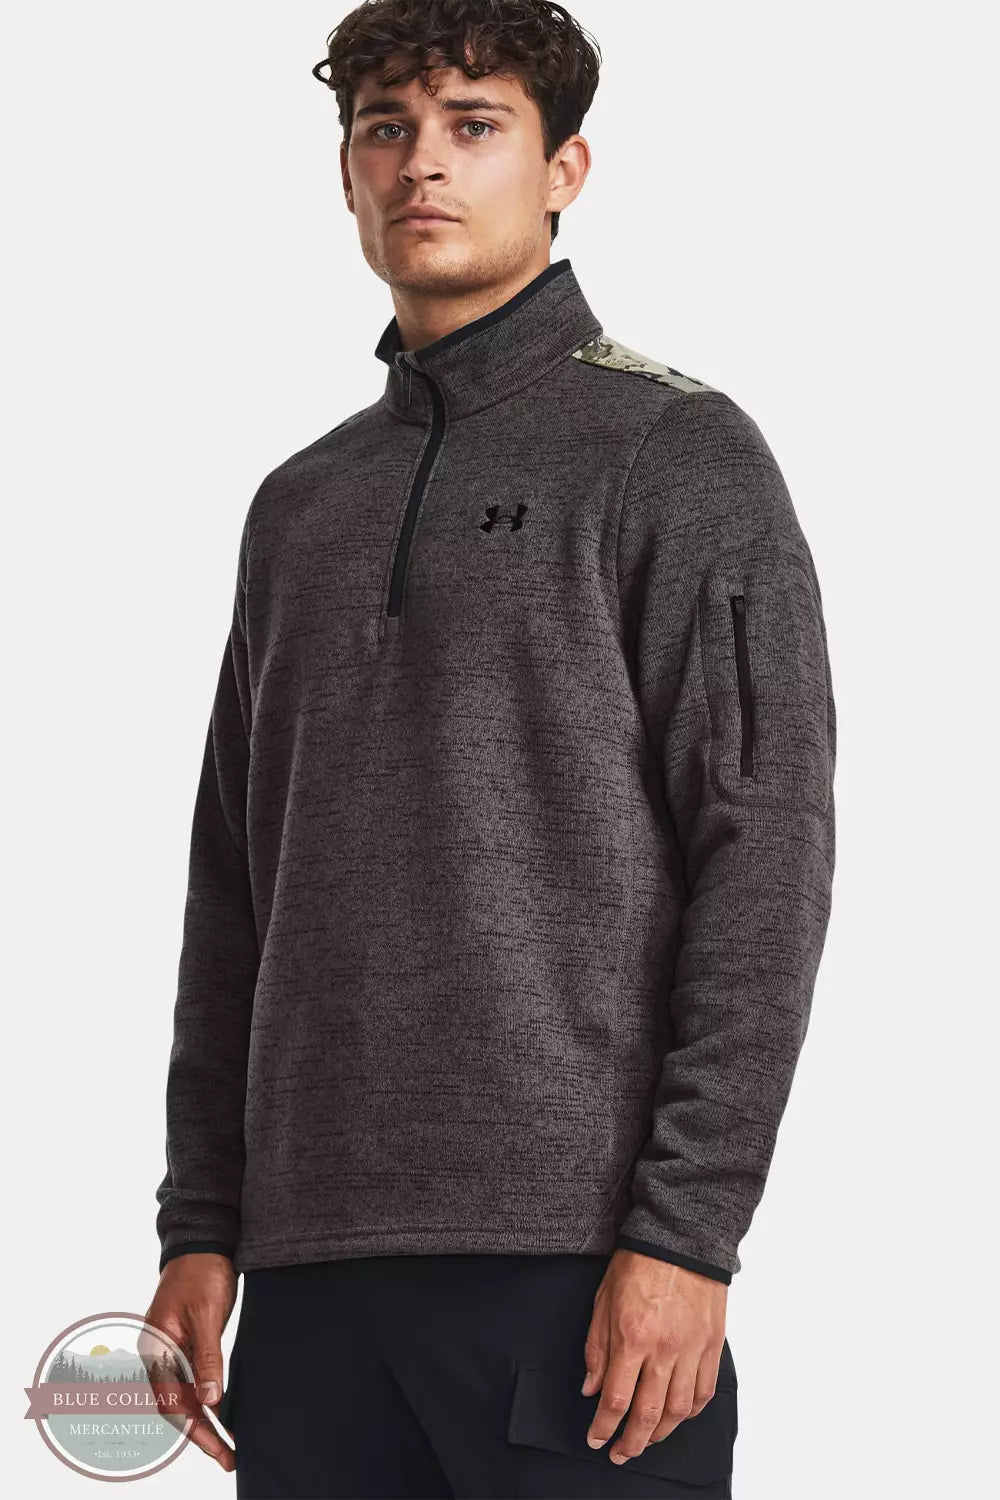 Under Armour 1382178 Specialist Print Quarter Zip Pullover Charcoal Front View